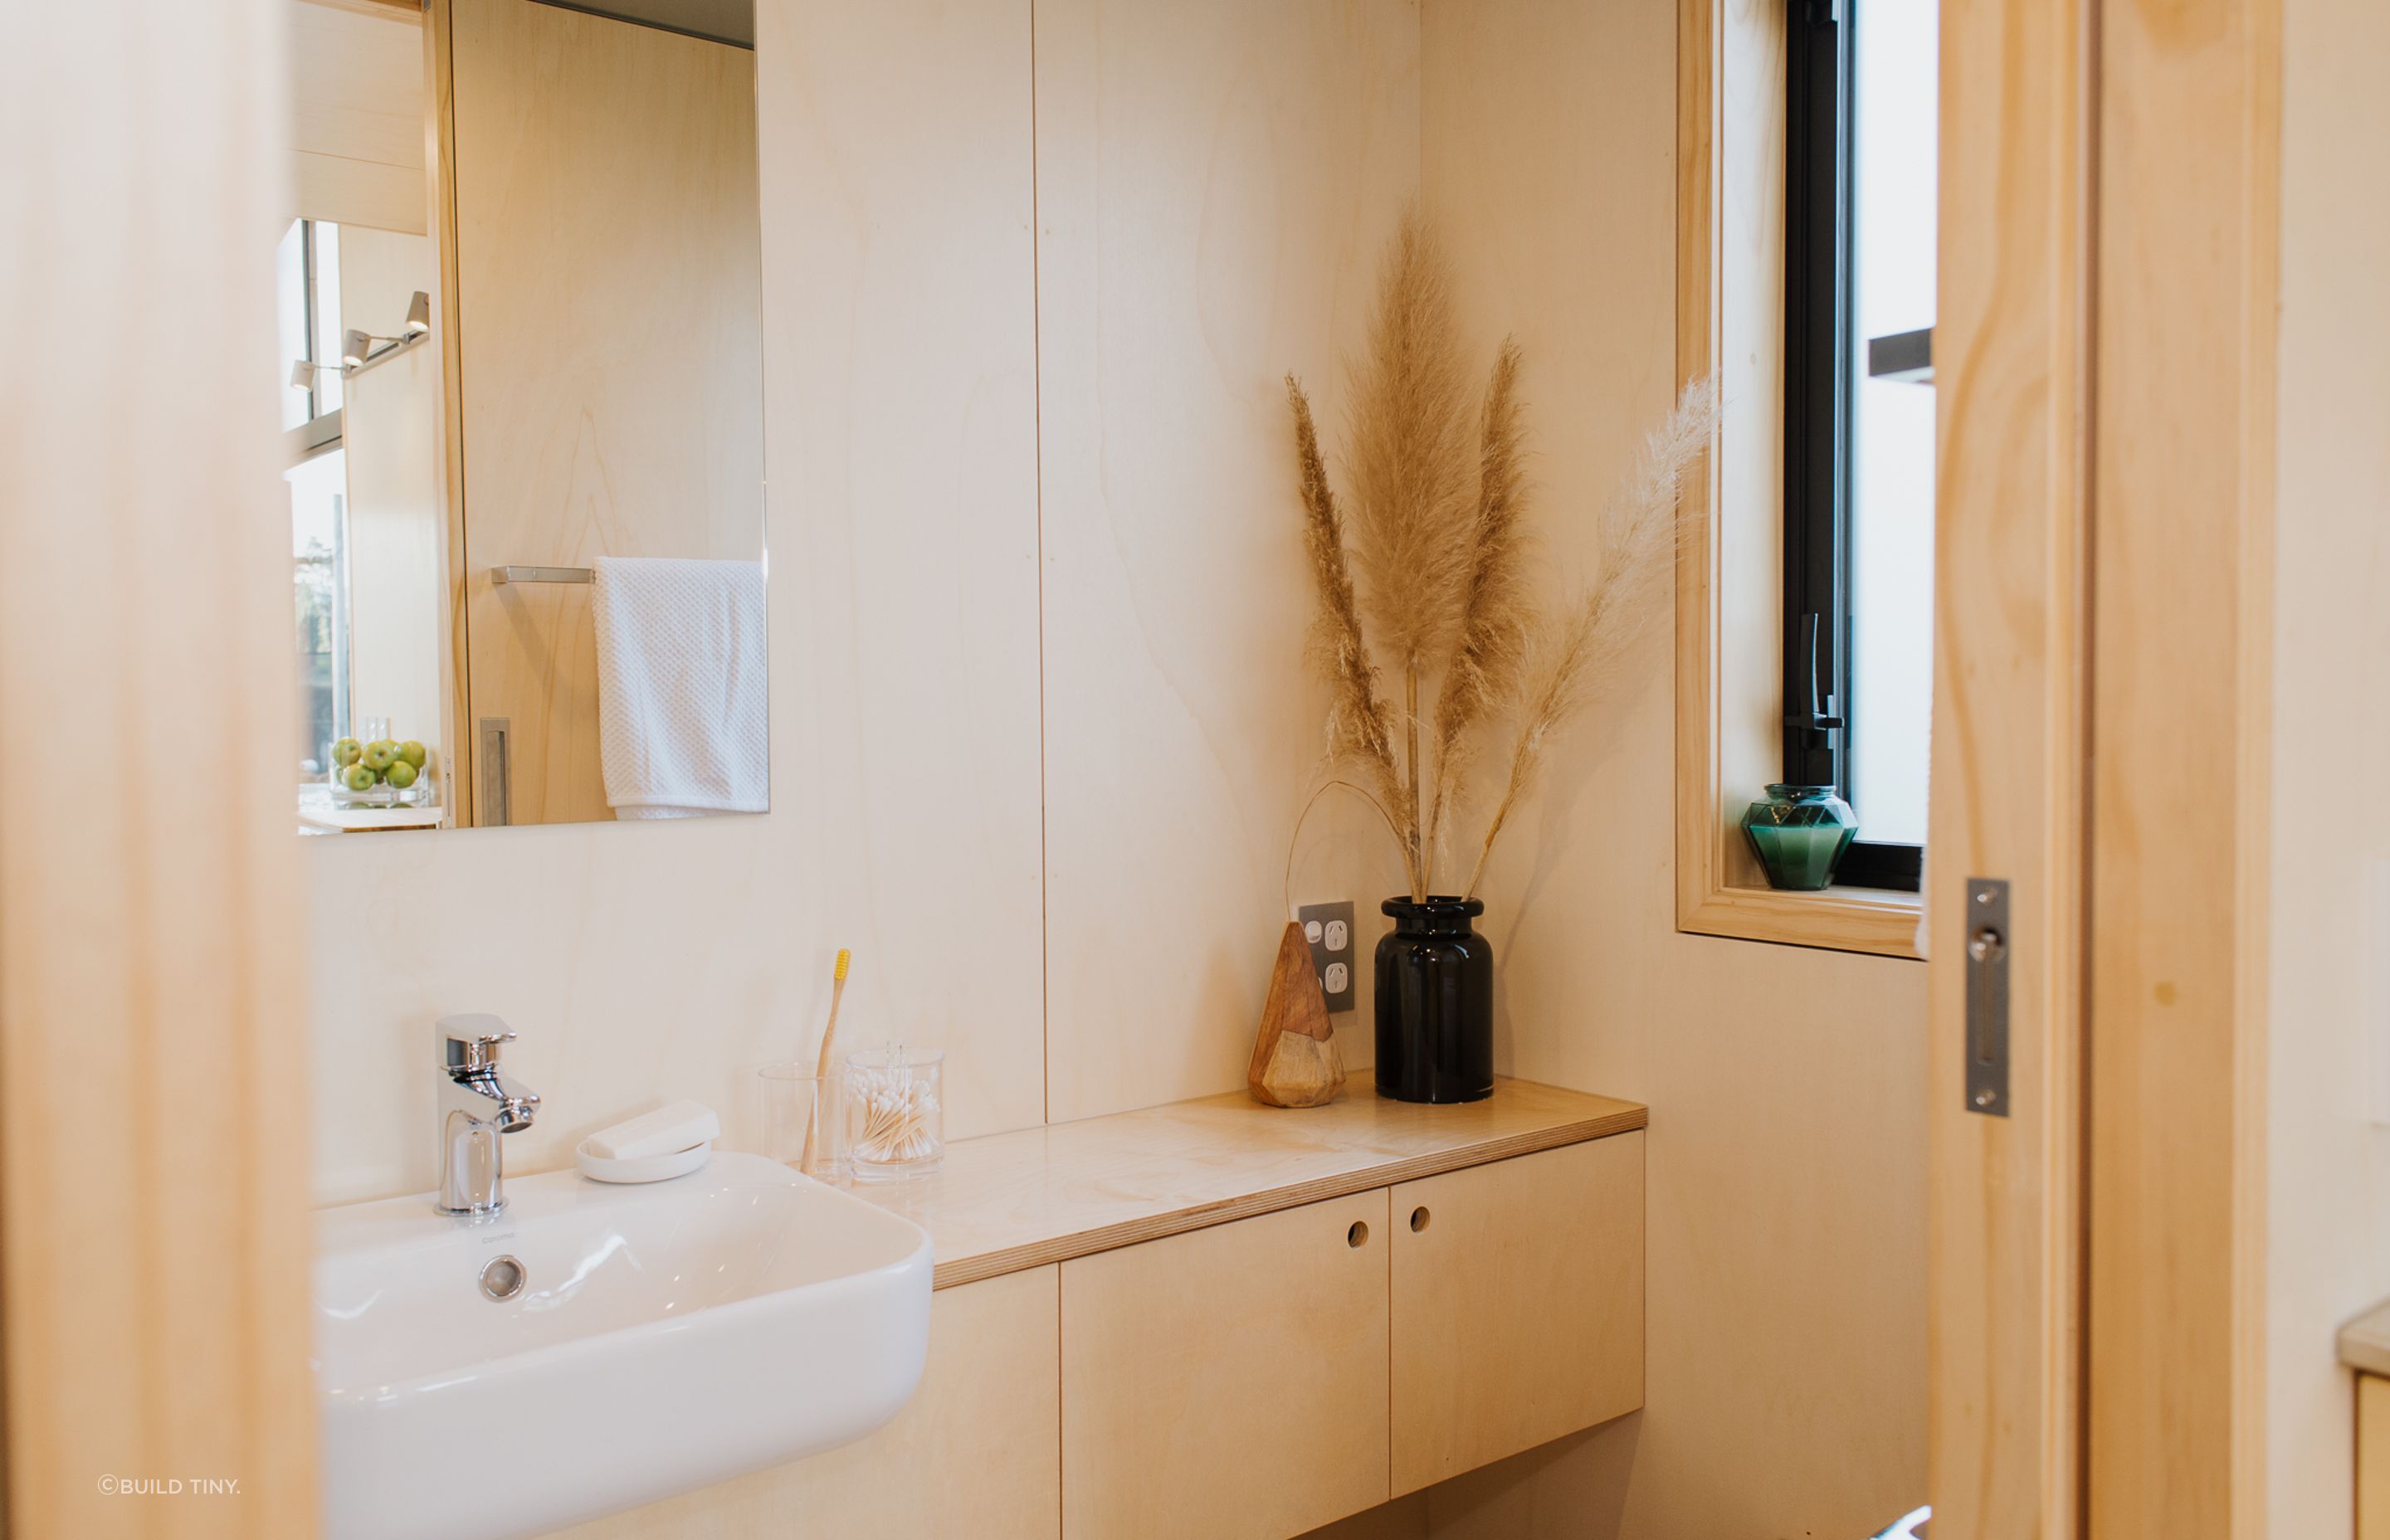 The bathroom features a cavilty sliding door, built-in plywood storage and a bamboo composting toilet. Photography supplied by Build Tiny.